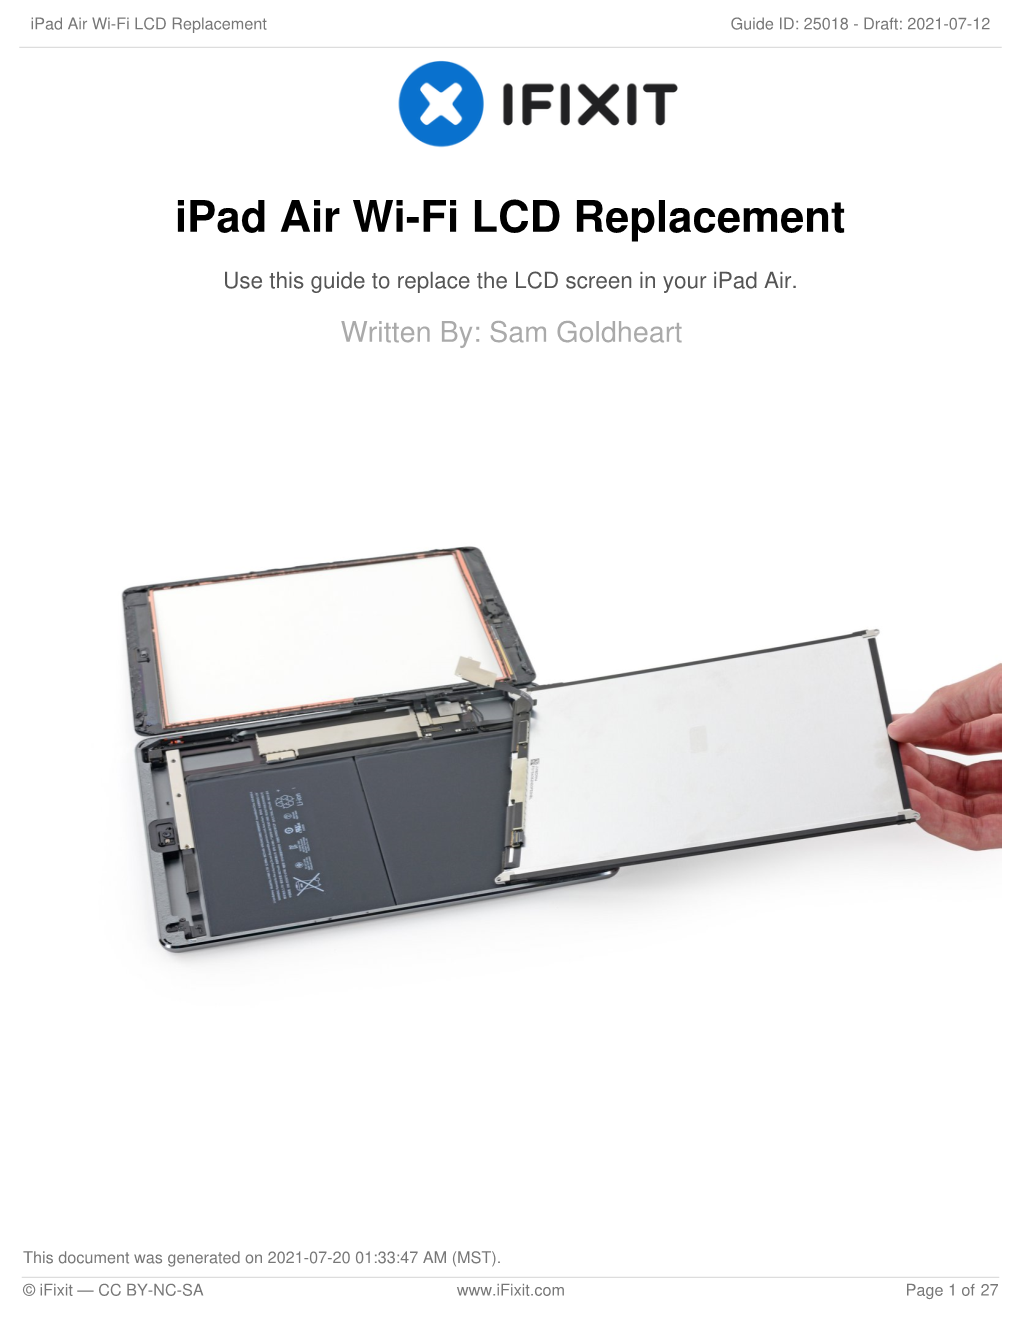 Ipad Air Wi-Fi LCD Replacement Guide ID: 25018 - Draft: 2021-07-12